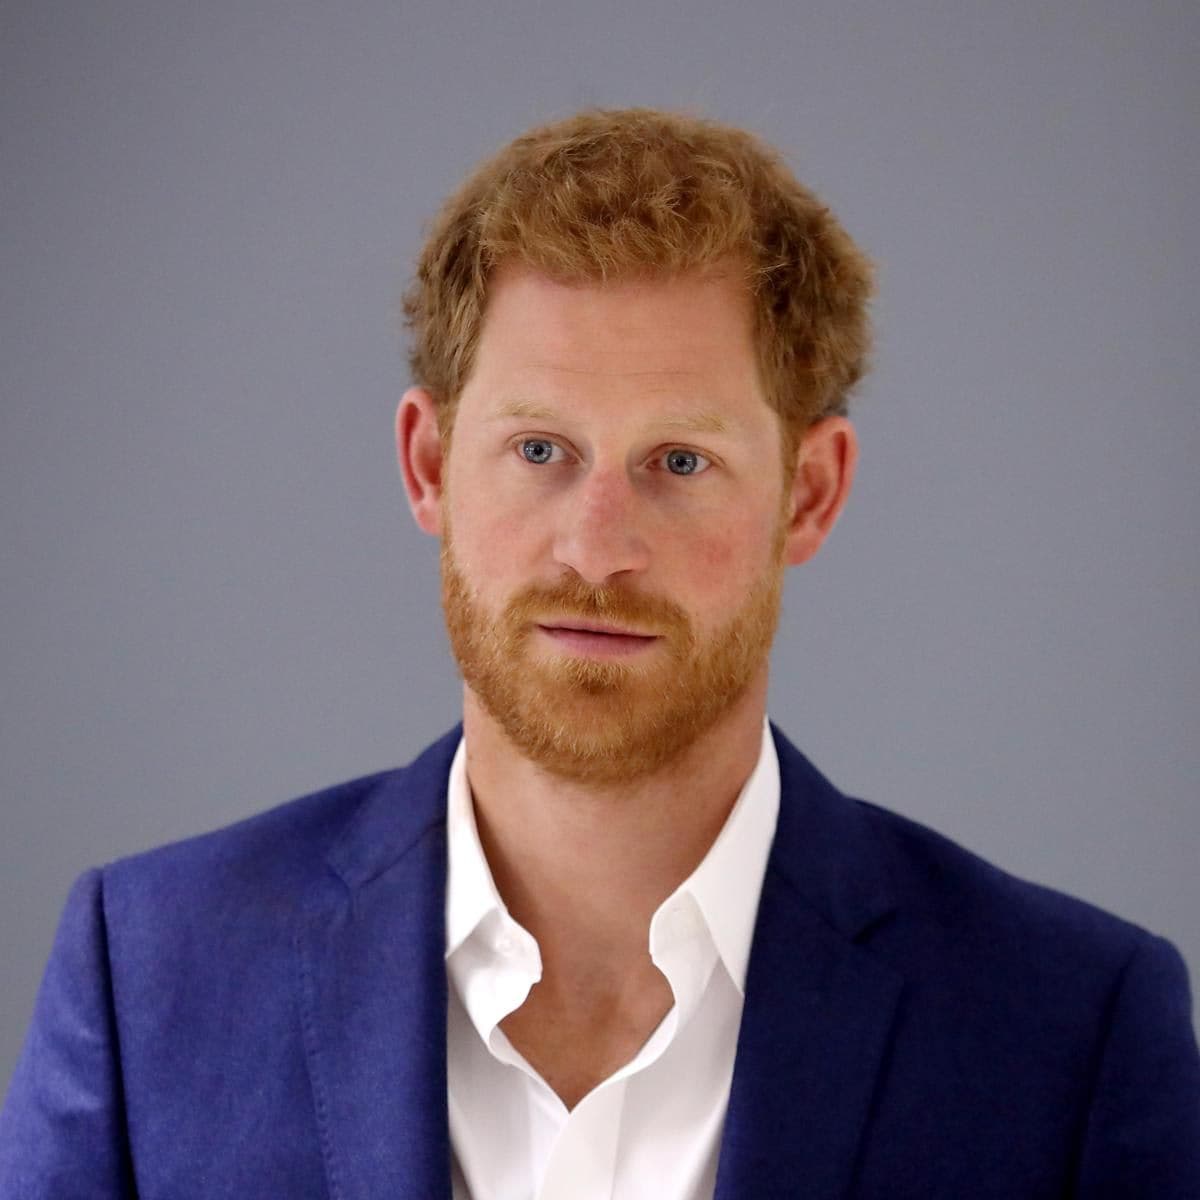 The UK ‘is and always will be’ Harry’s home, lawyer for the Duke of Sussex said